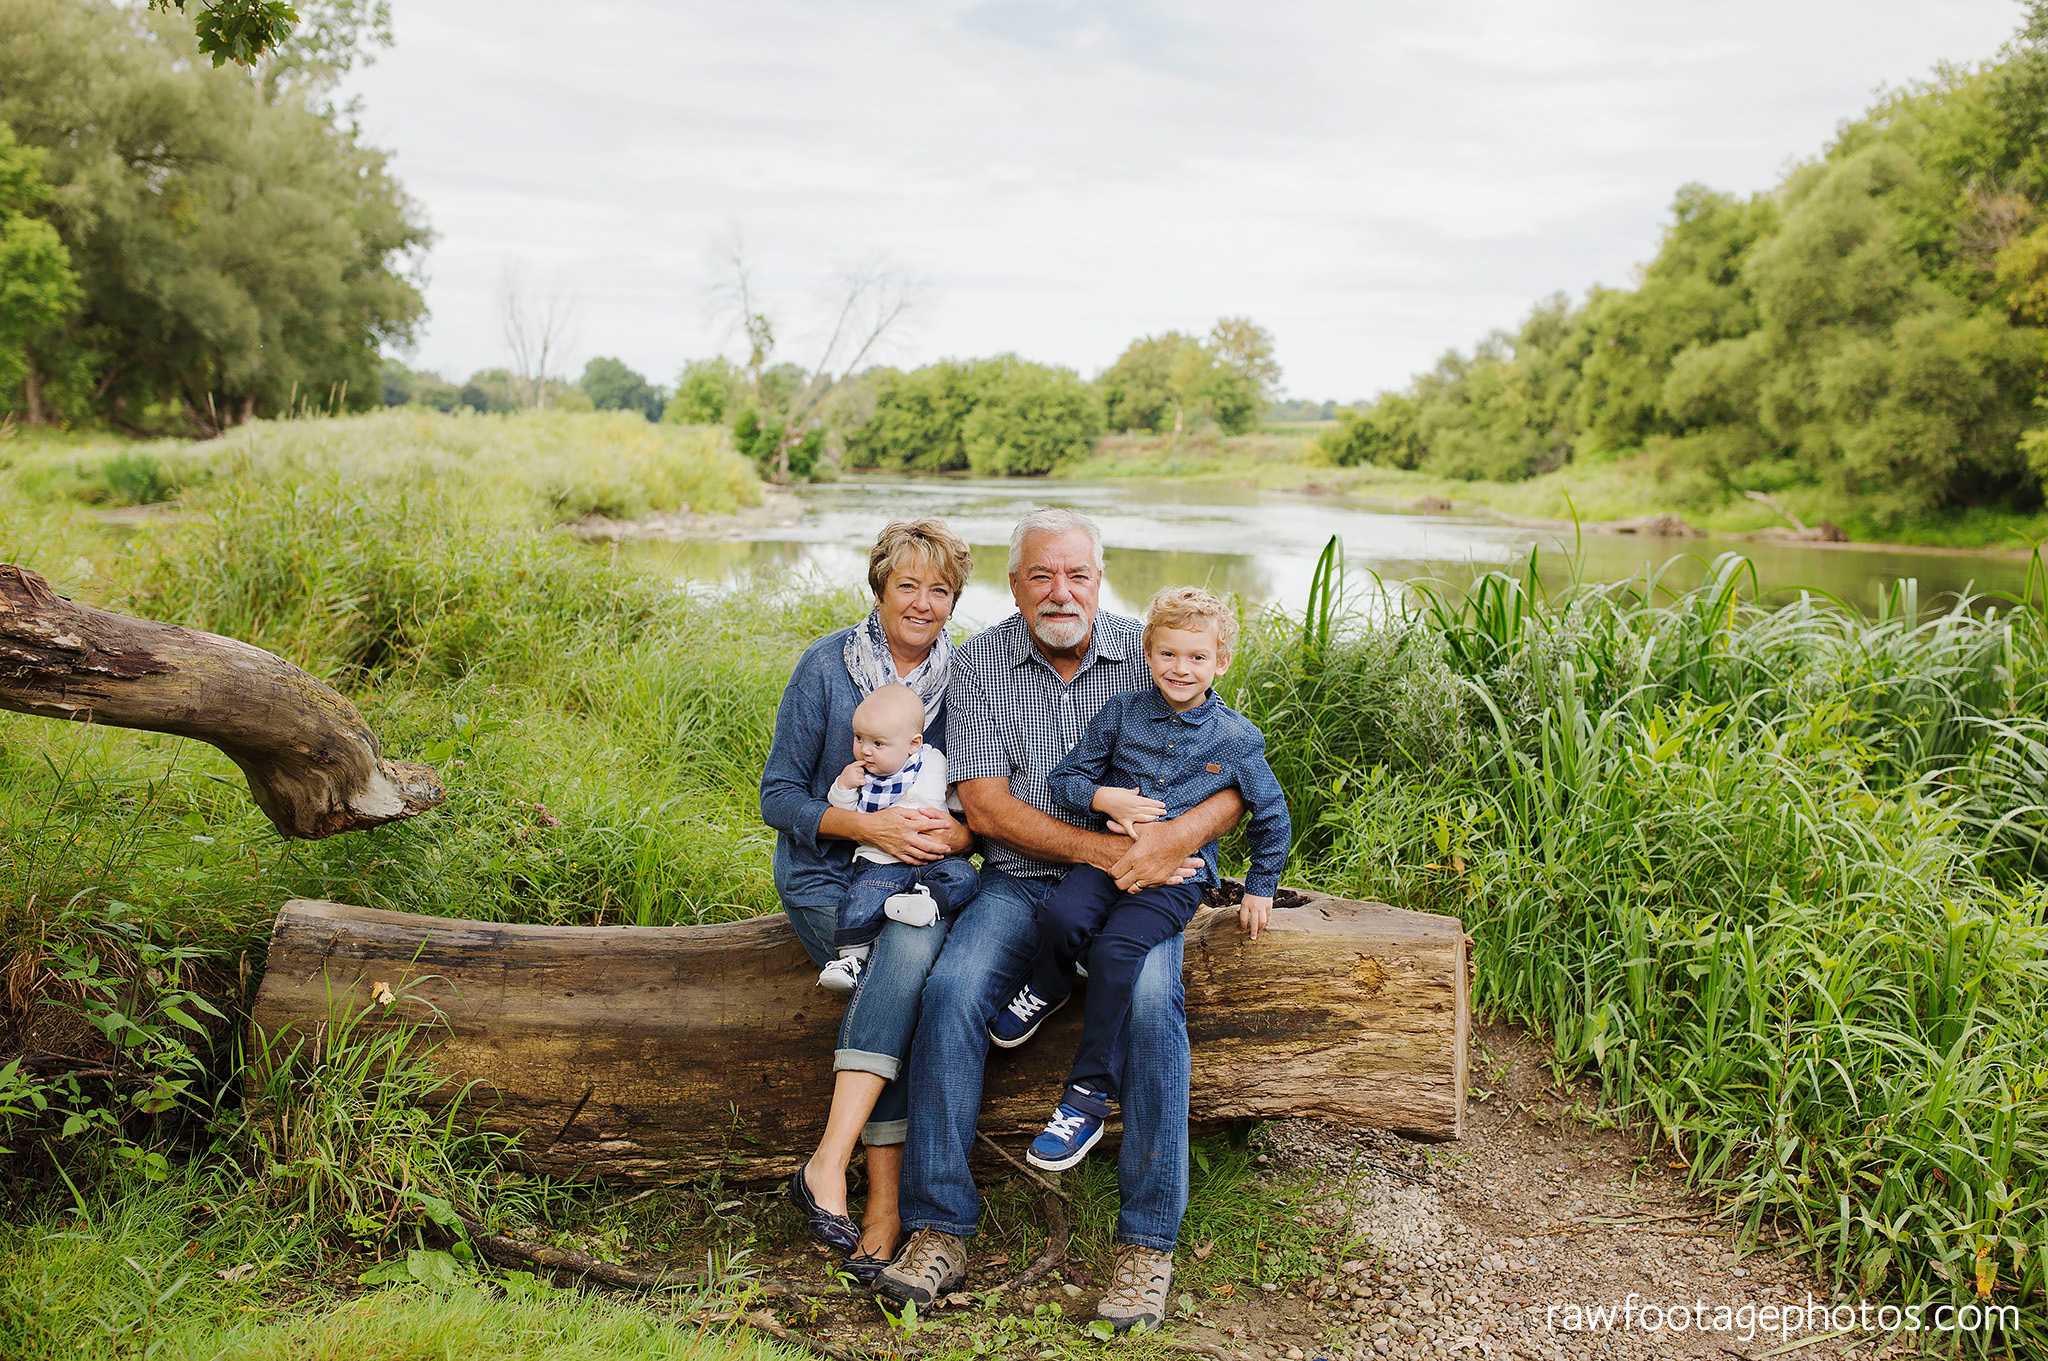 london_ontario_extended_family_photographer-raw_footage_photography006.jpg